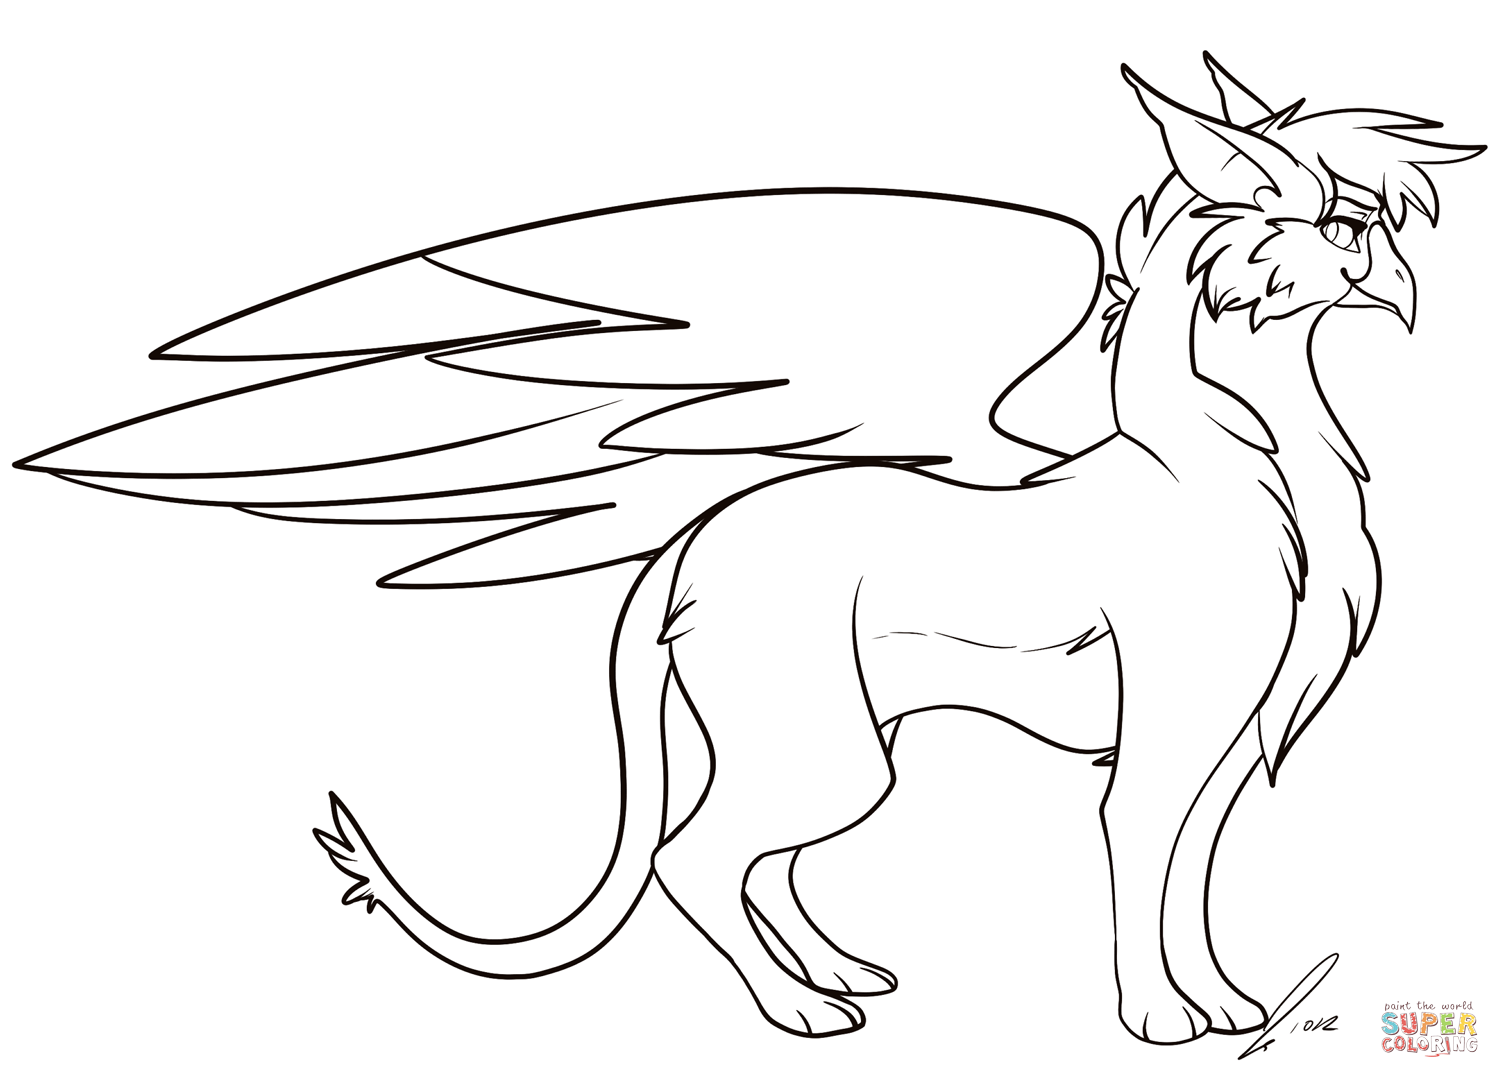 Cartoon Griffin coloring page | Free Printable Coloring Pages